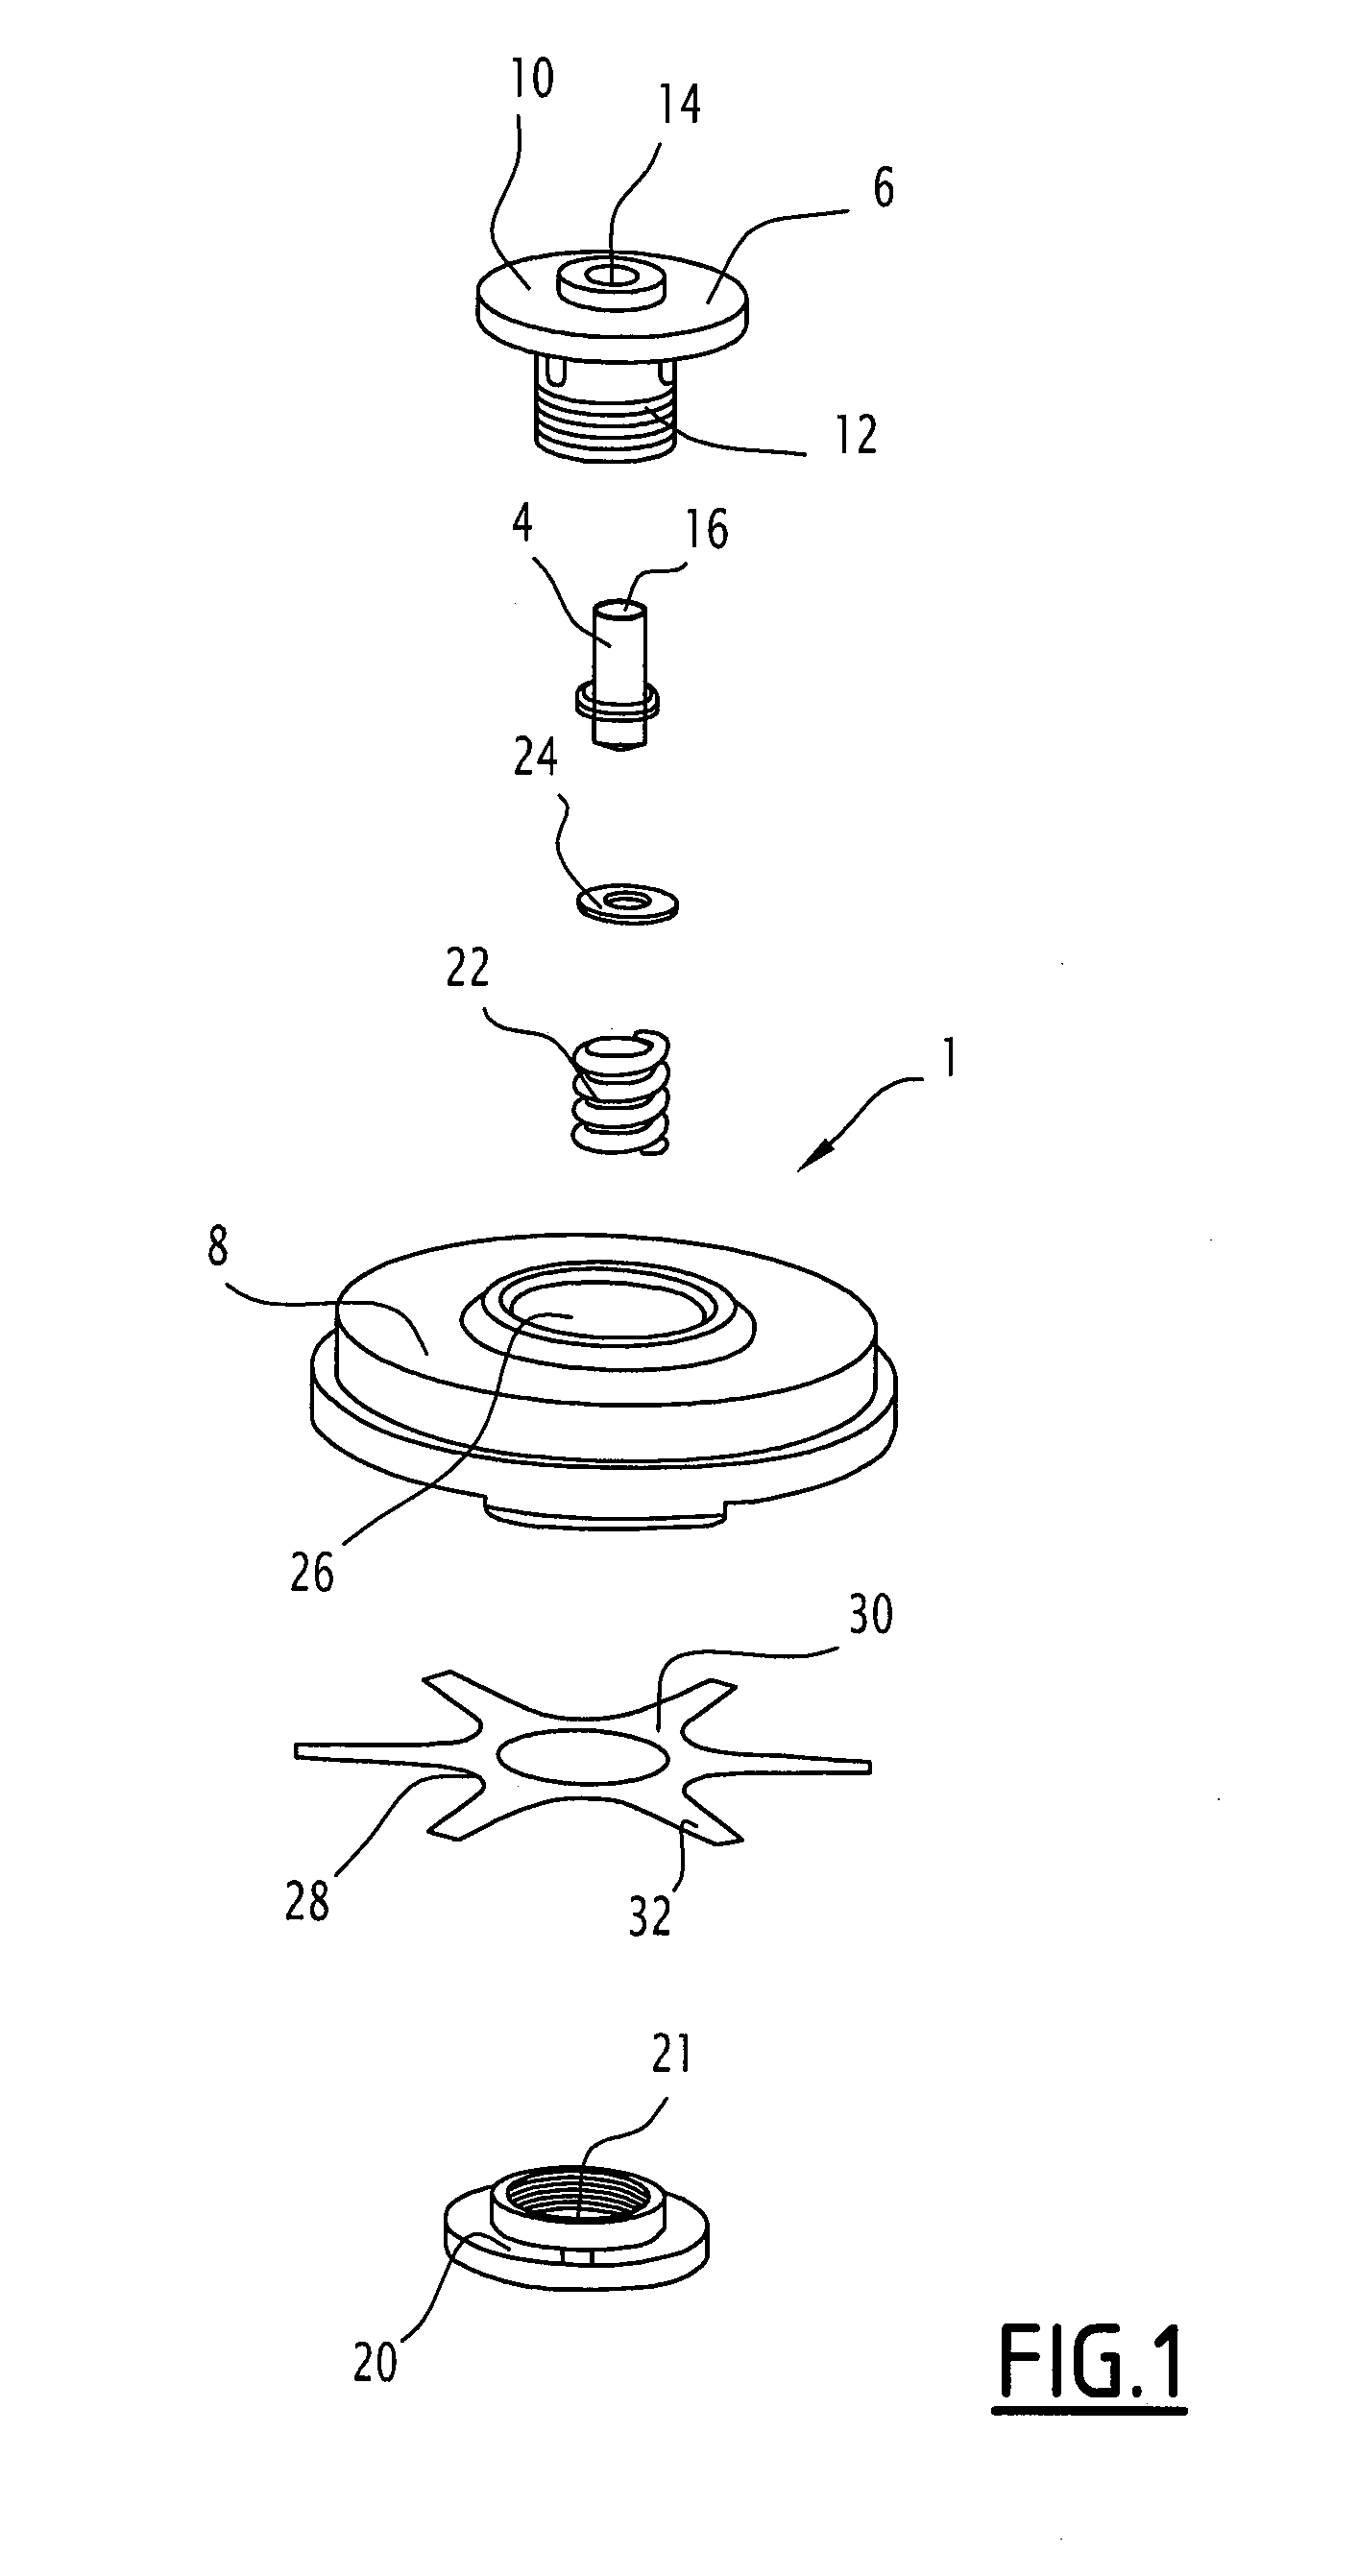 Valve Assembly for Damper between a Lower Chamber and a Compensation Chamber in the Damper